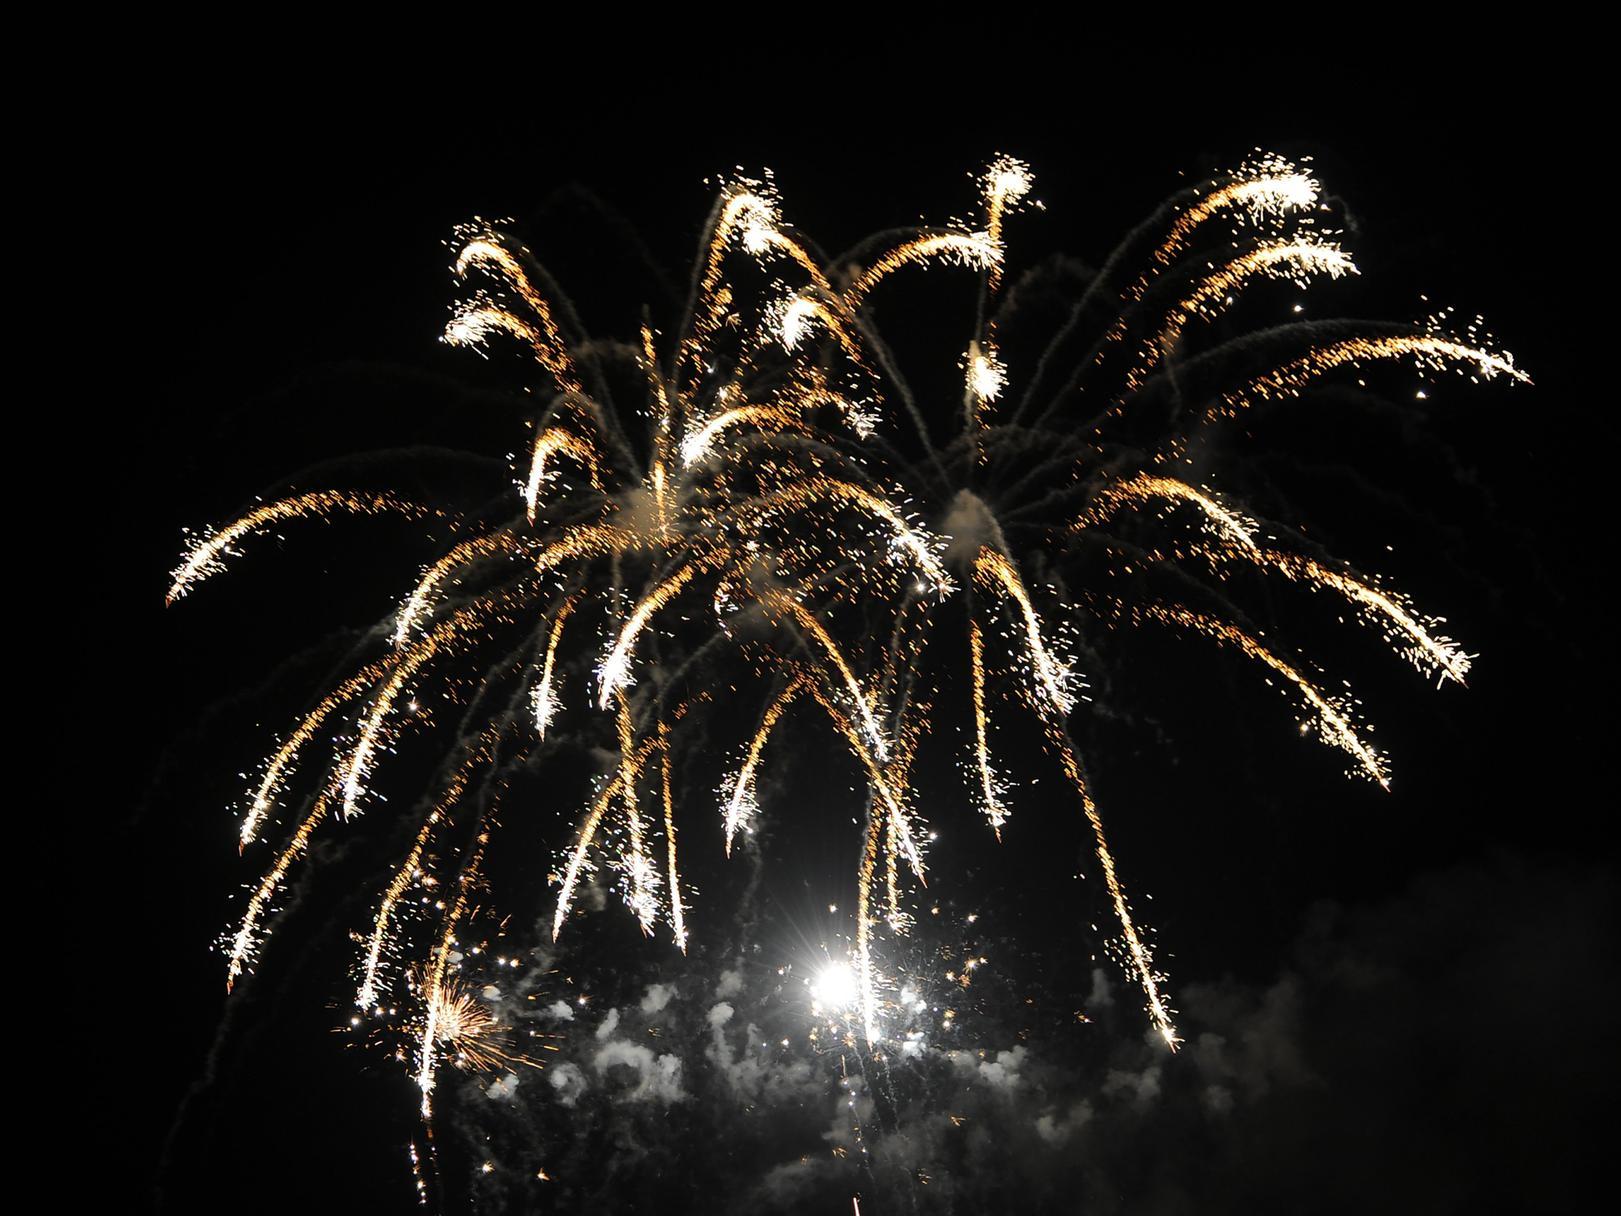 Councillors claim the 'antisocial use of fireworks' needs to be investigated.